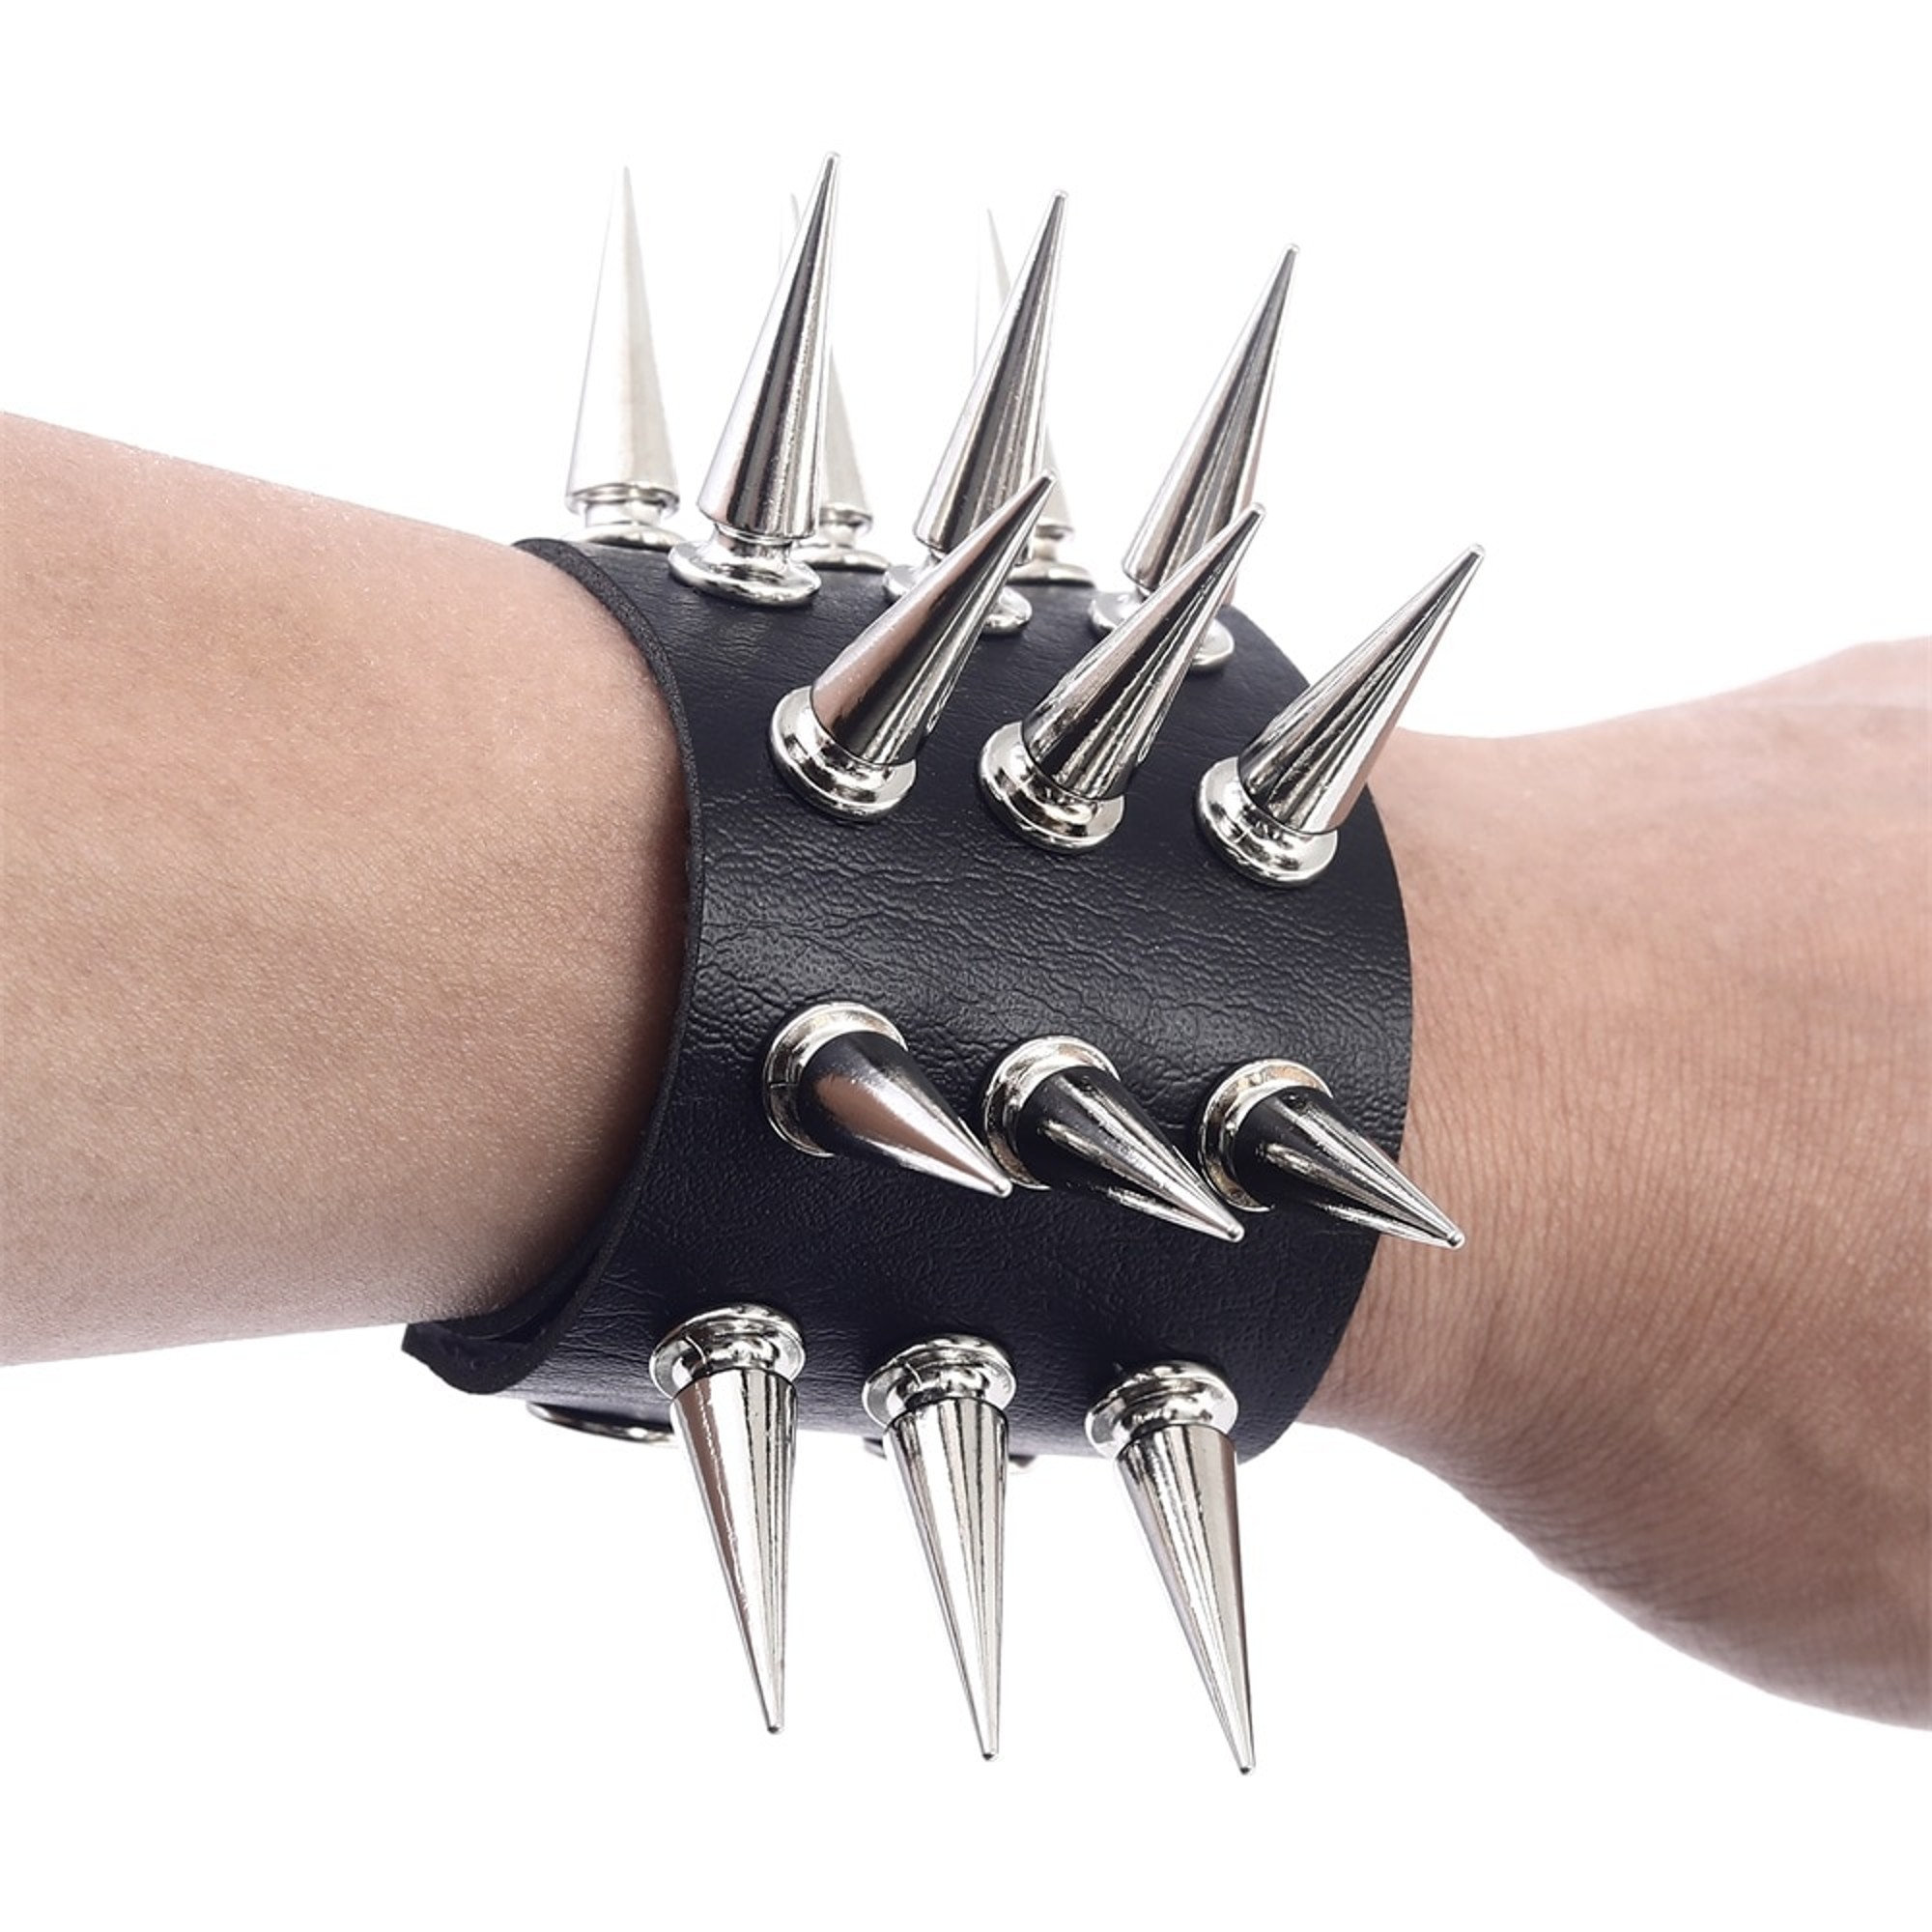 Y2K Emo Punk Spiked Leather Wrist Band Accessory